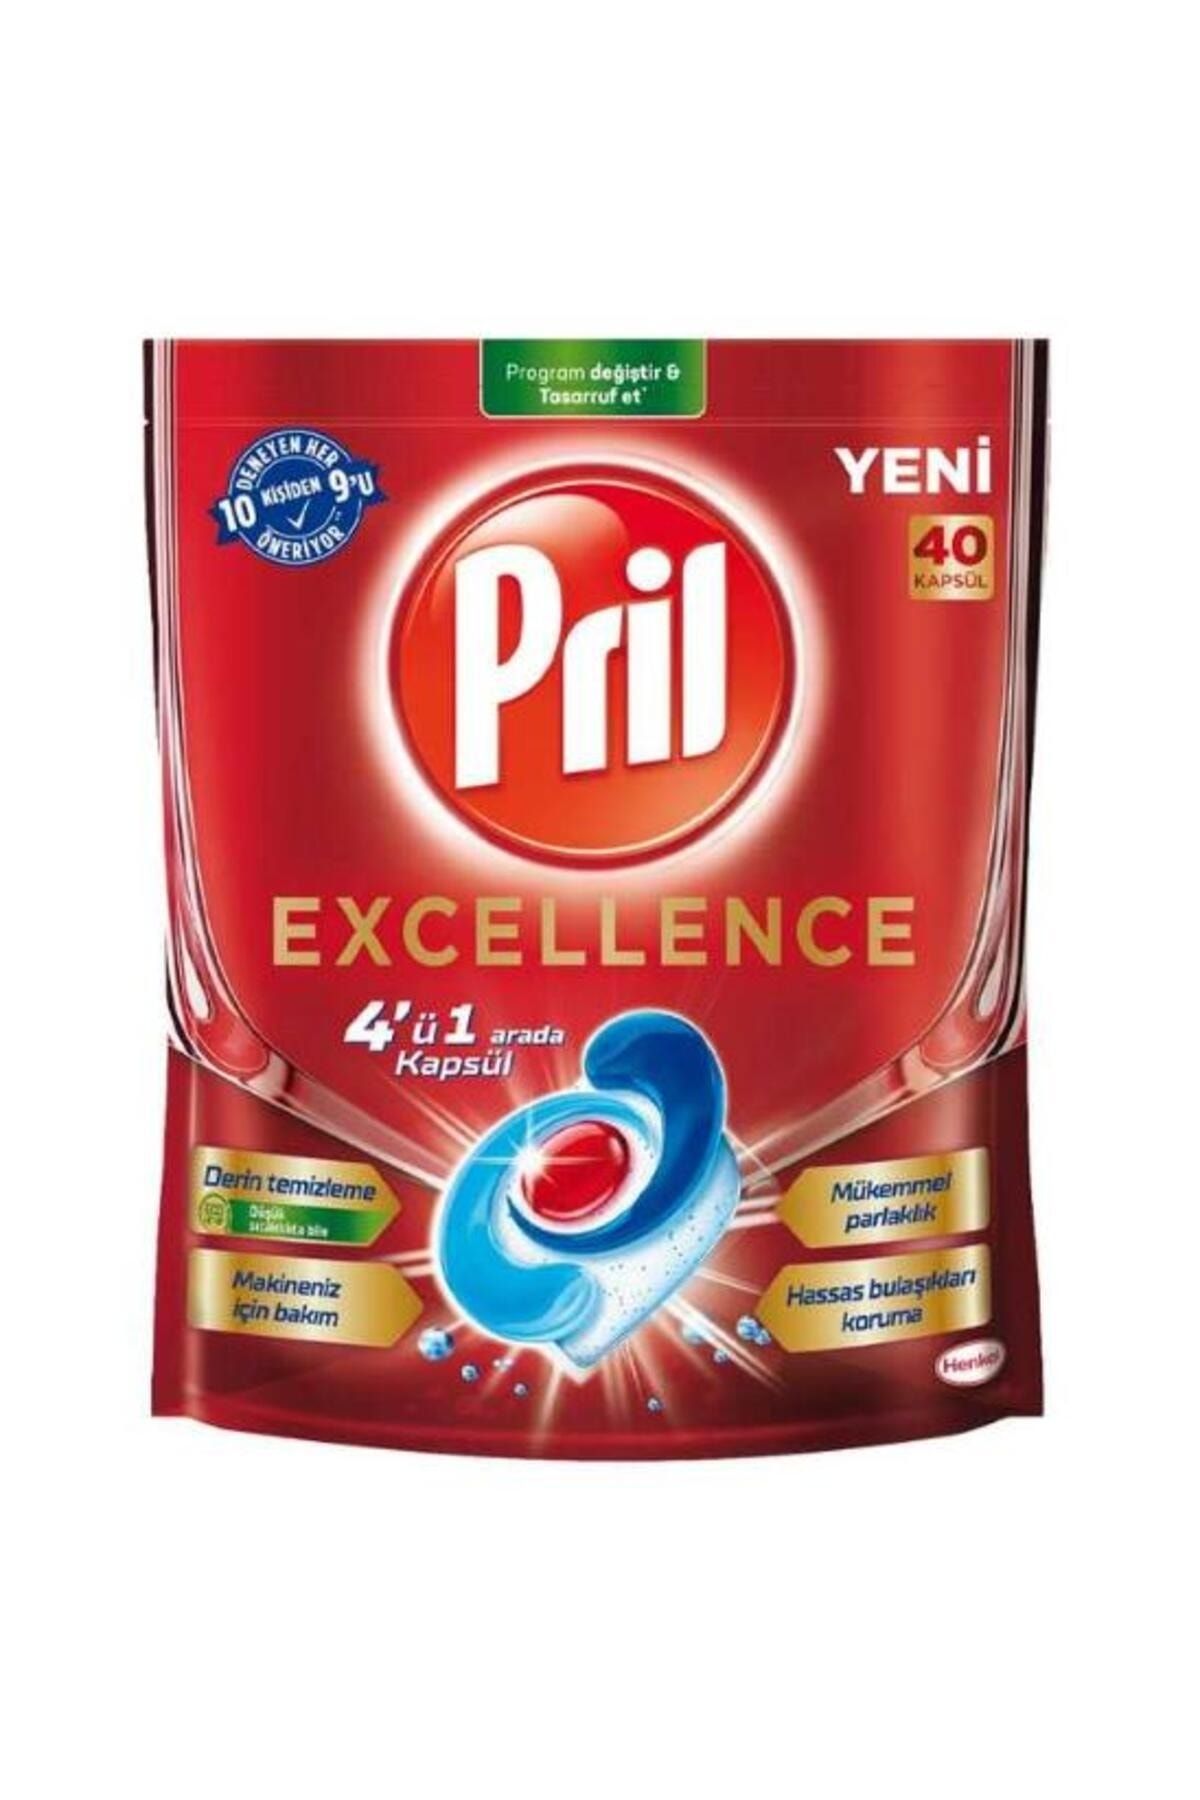 Pril Excellence 40 Tablet